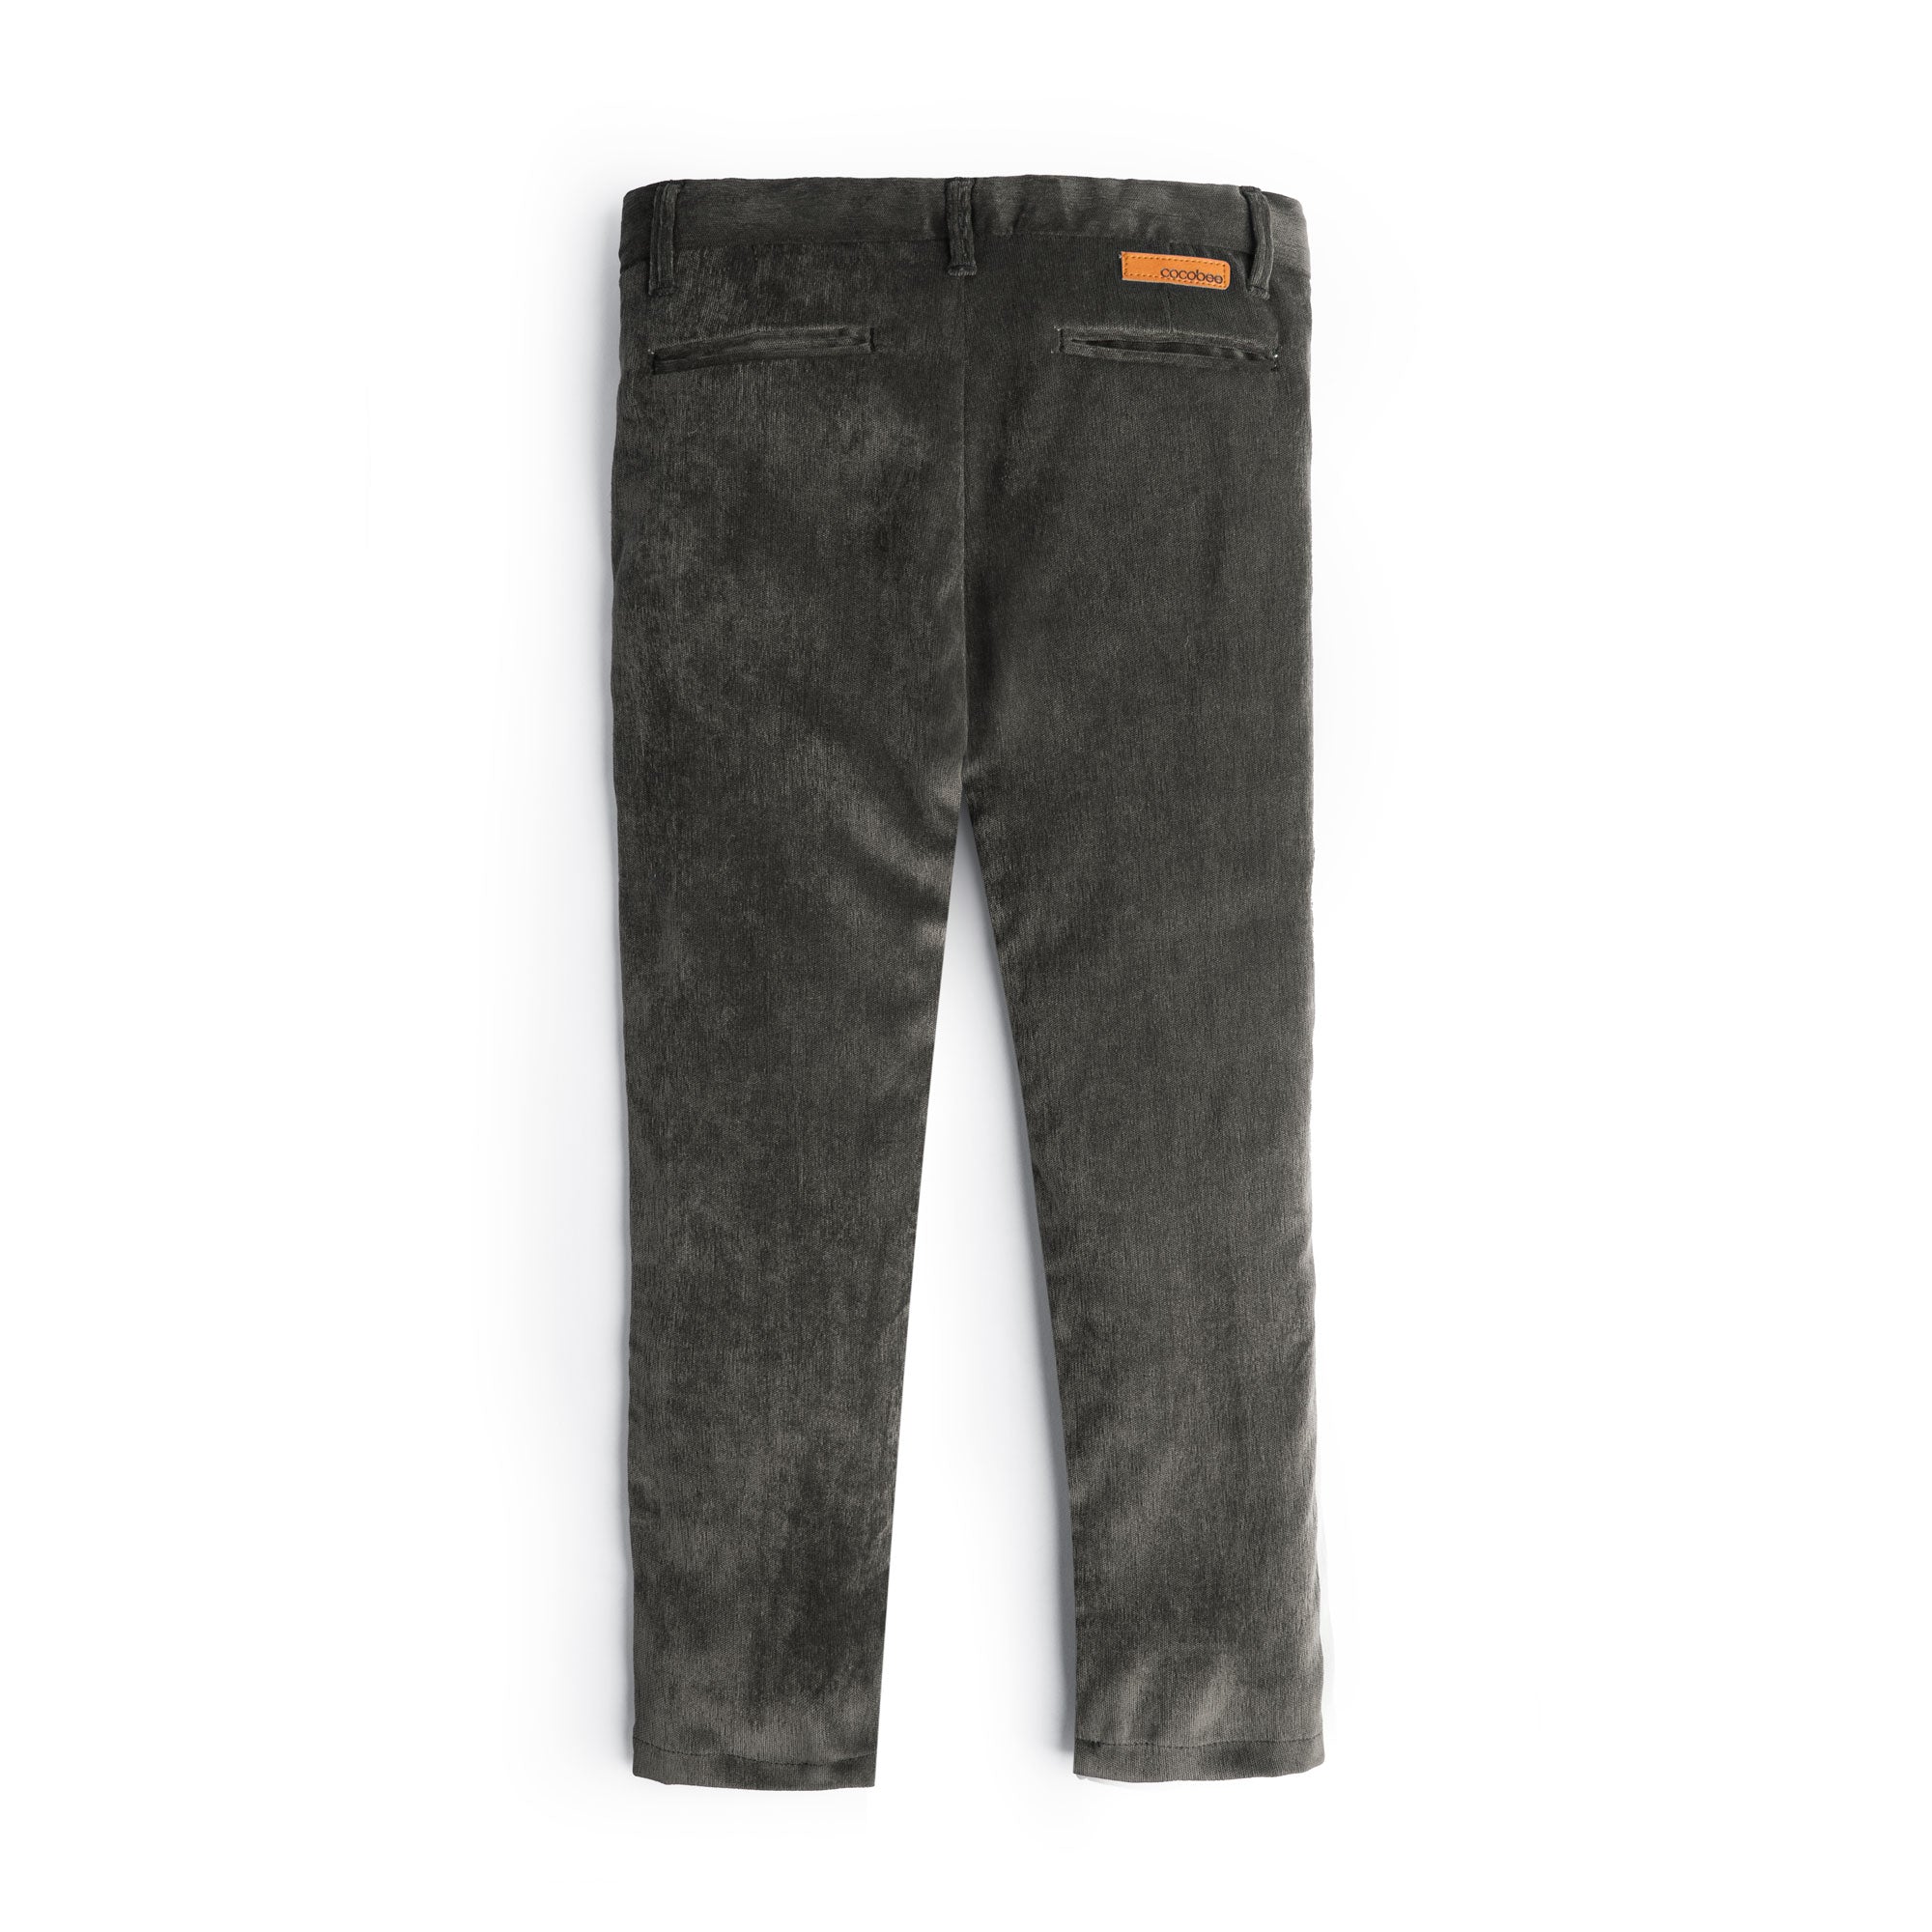 Charcoal Buttoned Pant